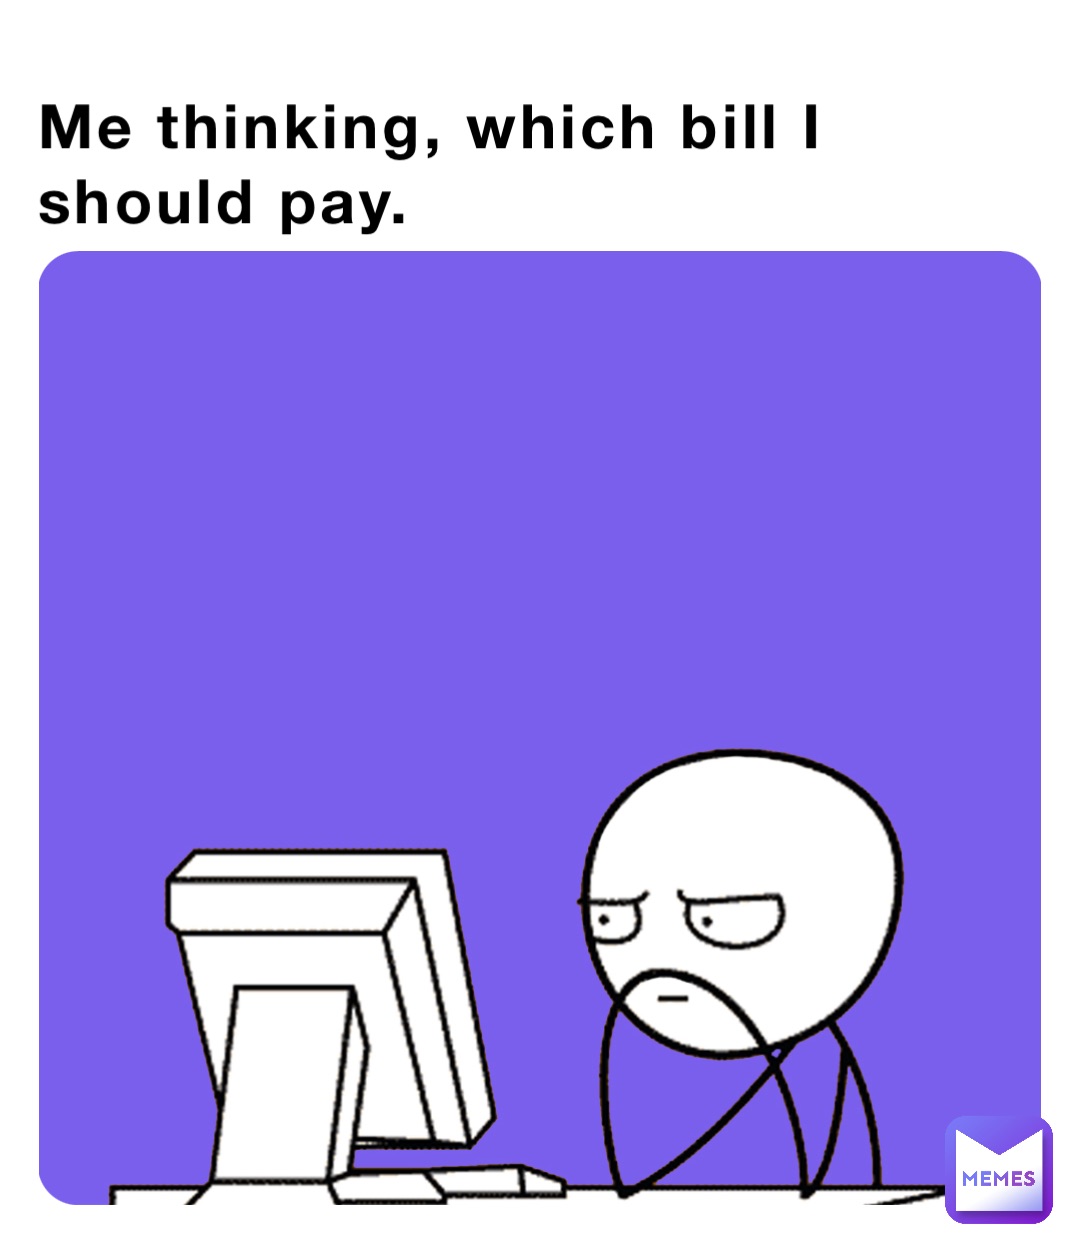 Me thinking, which bill I should pay.